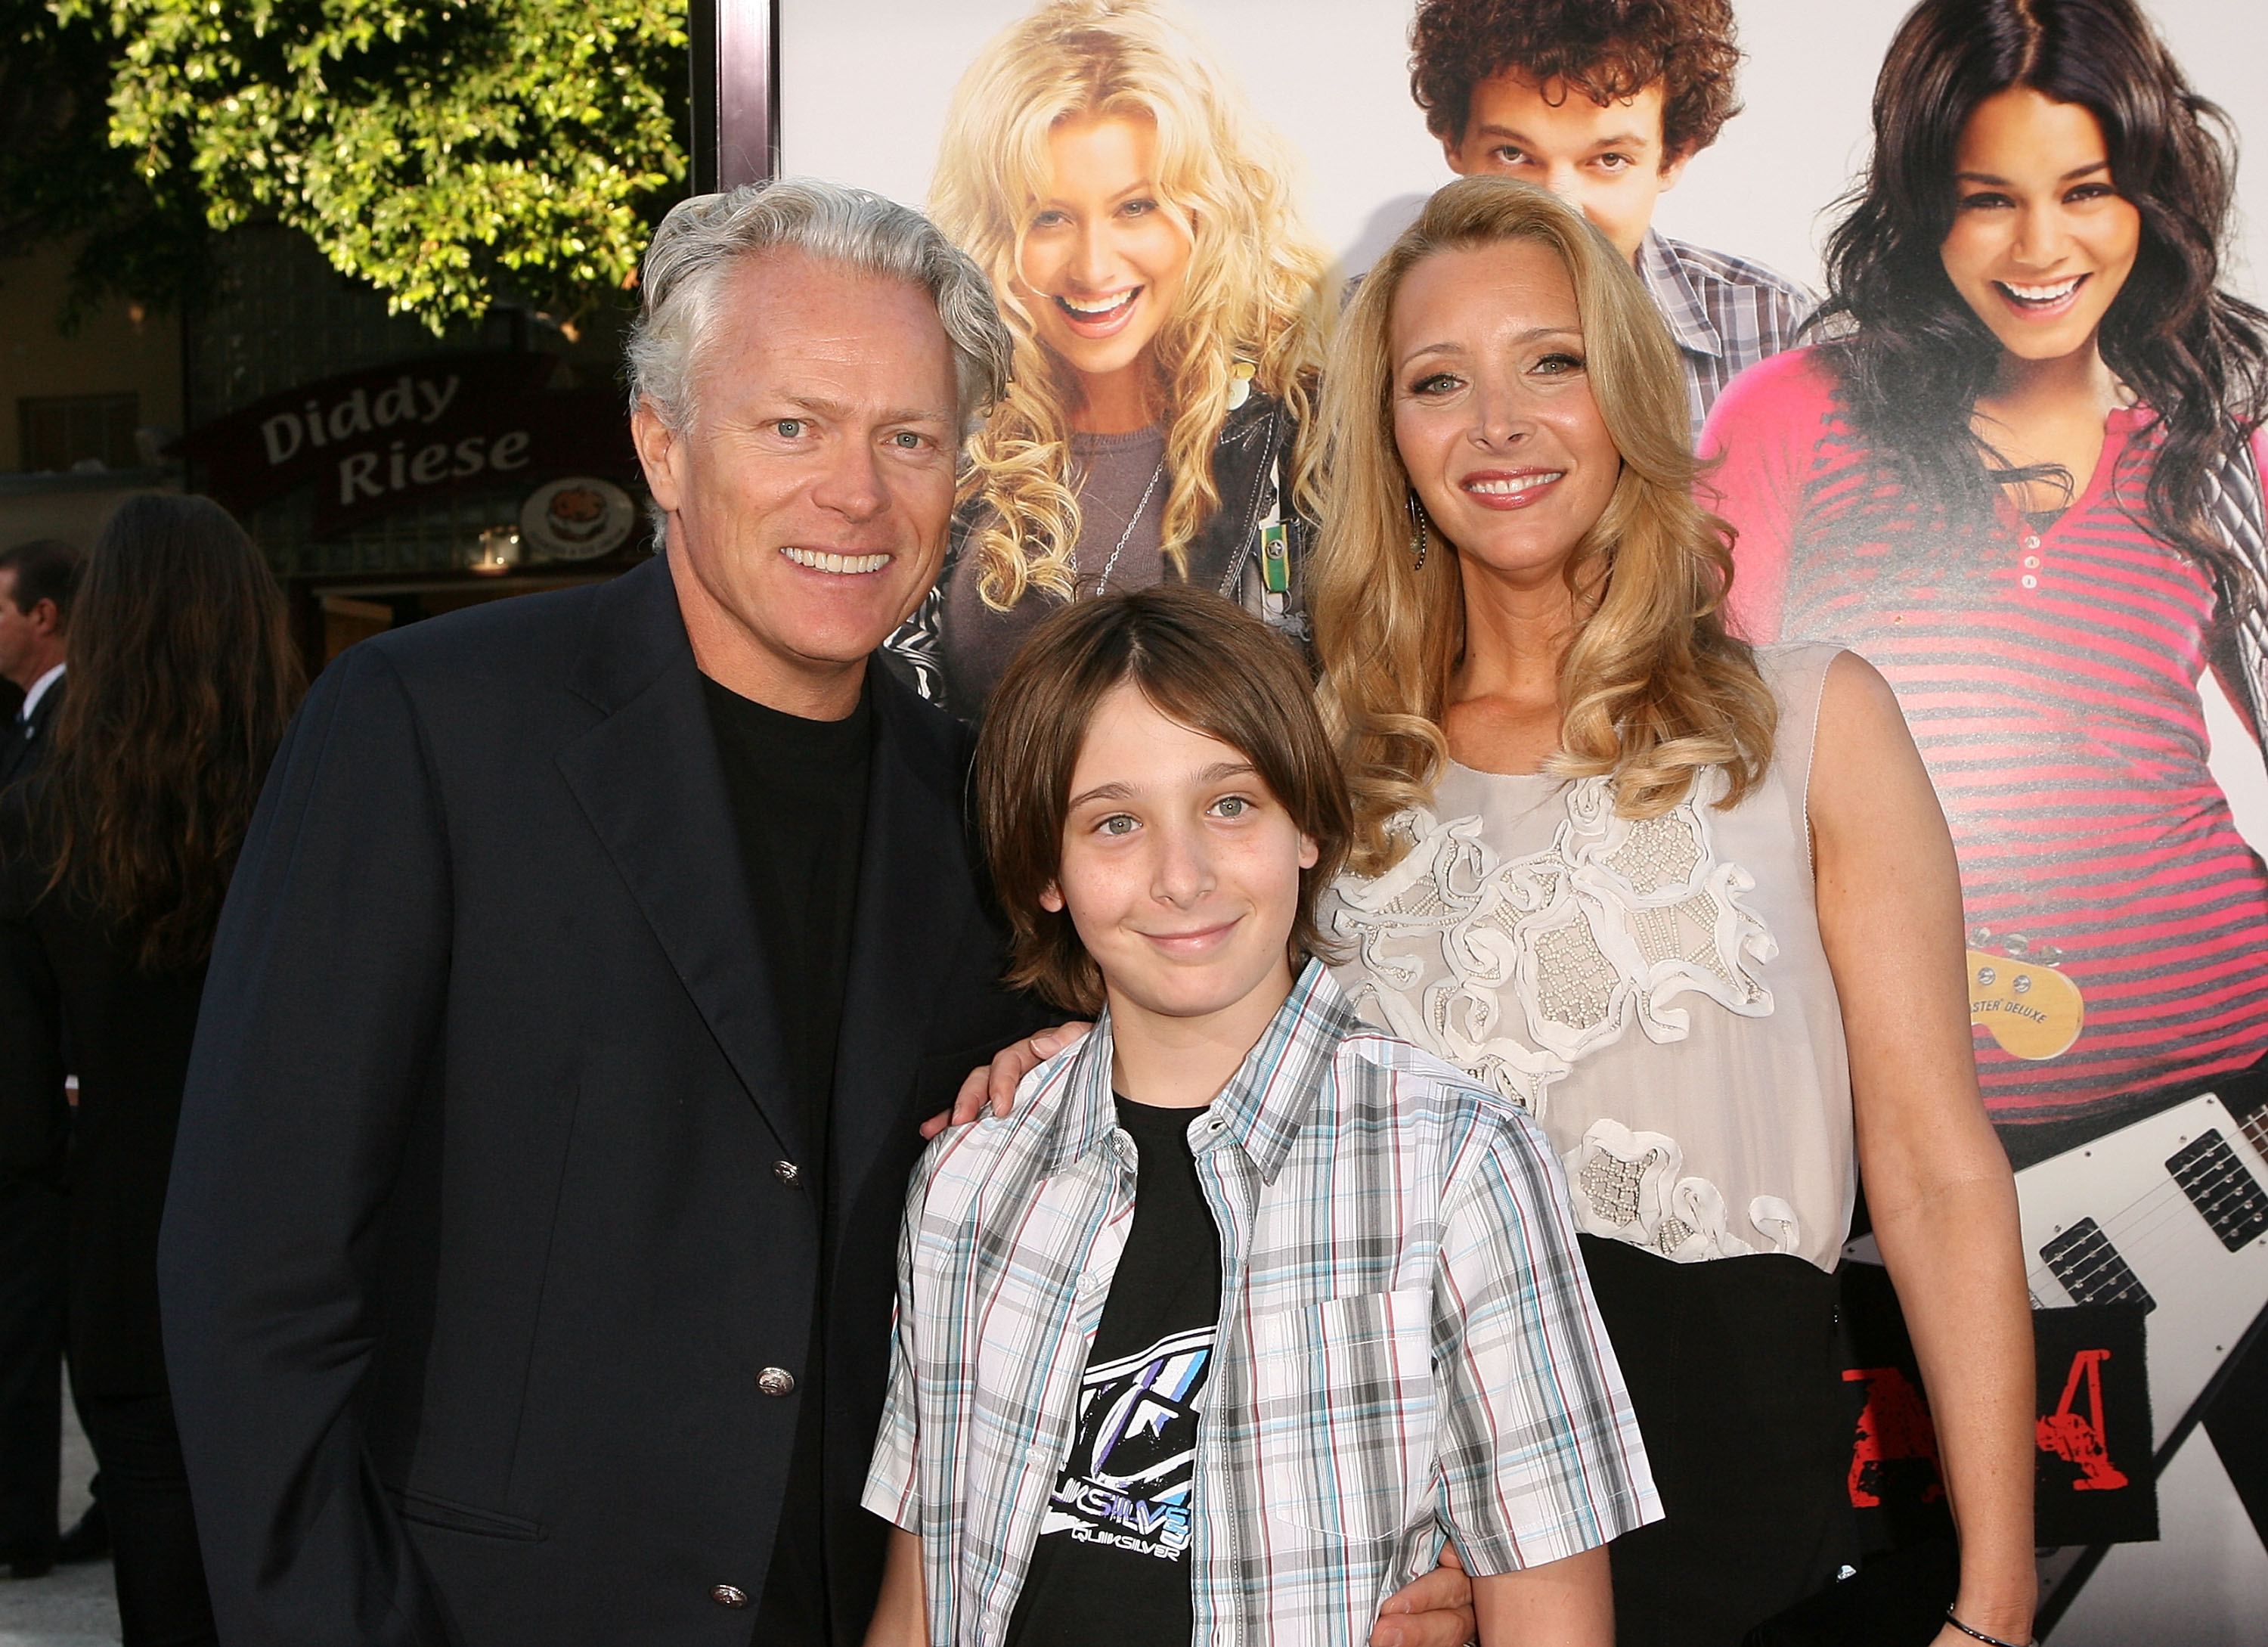 <p>Actress Lisa Kudrow, husband Michel Stern, a French ad exec, and their son, Julian -- who was 11 at the time -- attended the Los Angeles premiere of "Bandslam" in August 2009. When Lisa was expecting Julian, "Friends" wrote her pregnancy into the show, creating the storyline that her character, Phoebe Buffay, was acting as a surrogate (having triplets!) for her brother. Keep reading to see the "The Comeback" star's little boy all grown up and graduating from college...</p>